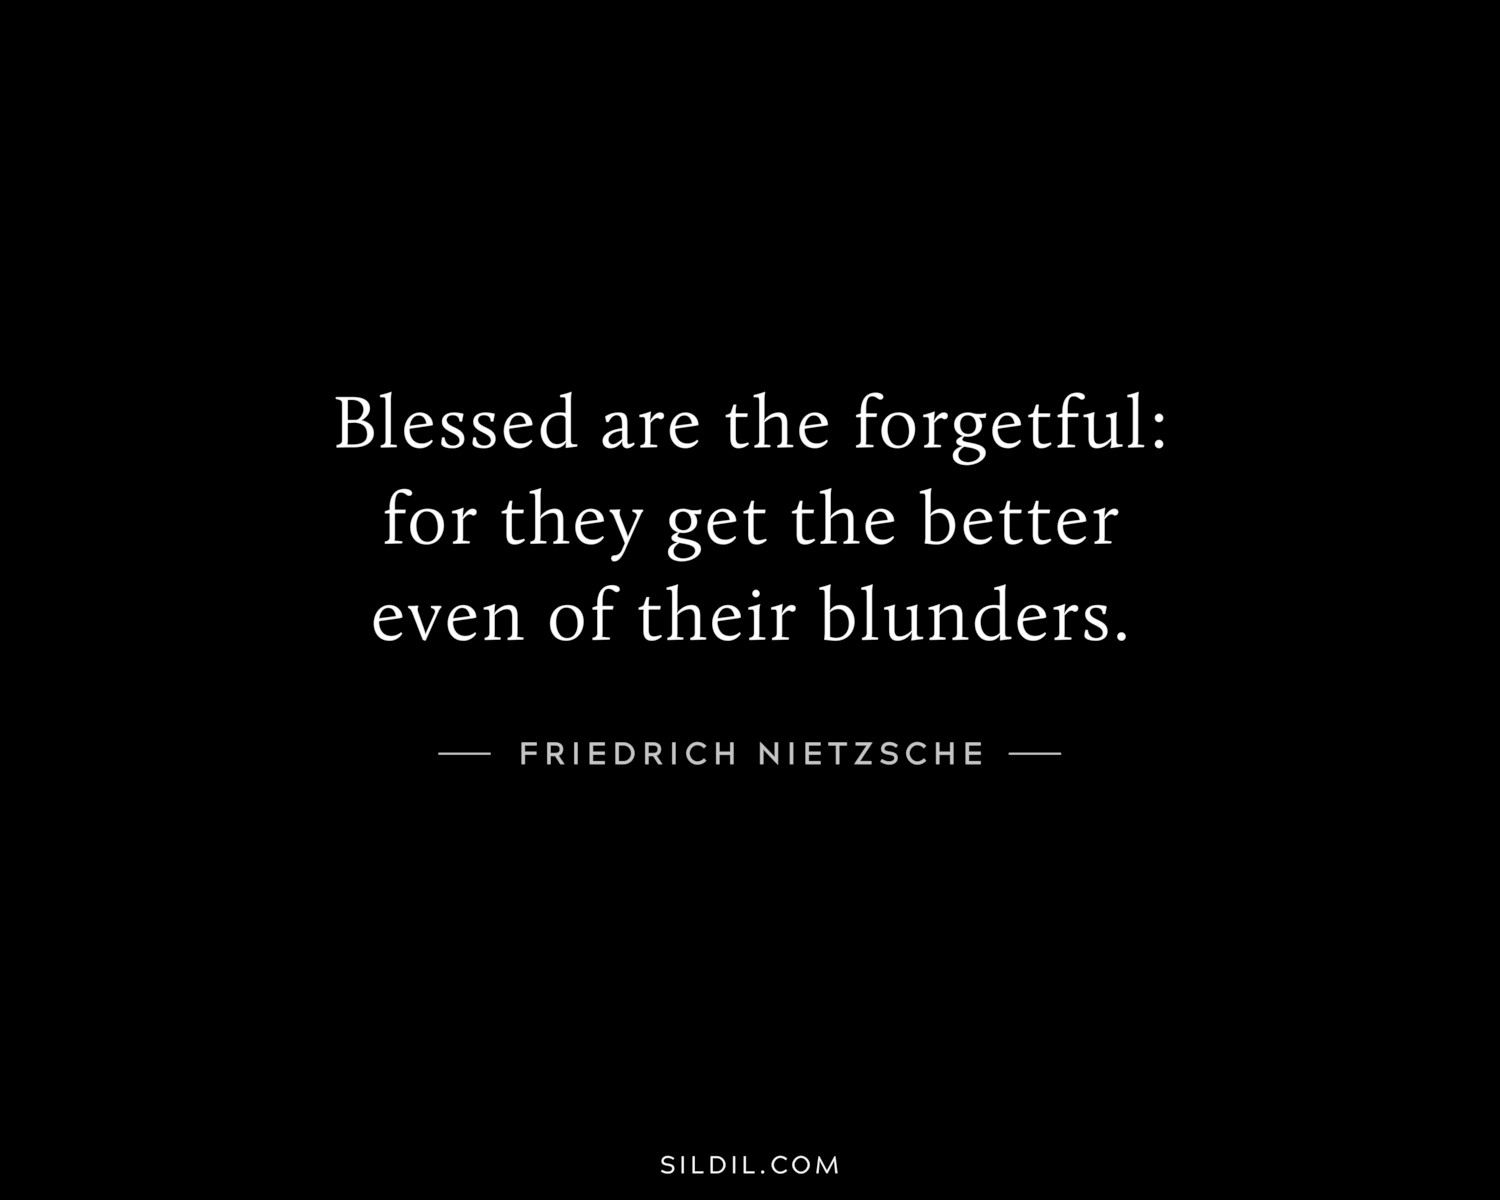 Blessed are the forgetful: for they get the better even of their blunders.